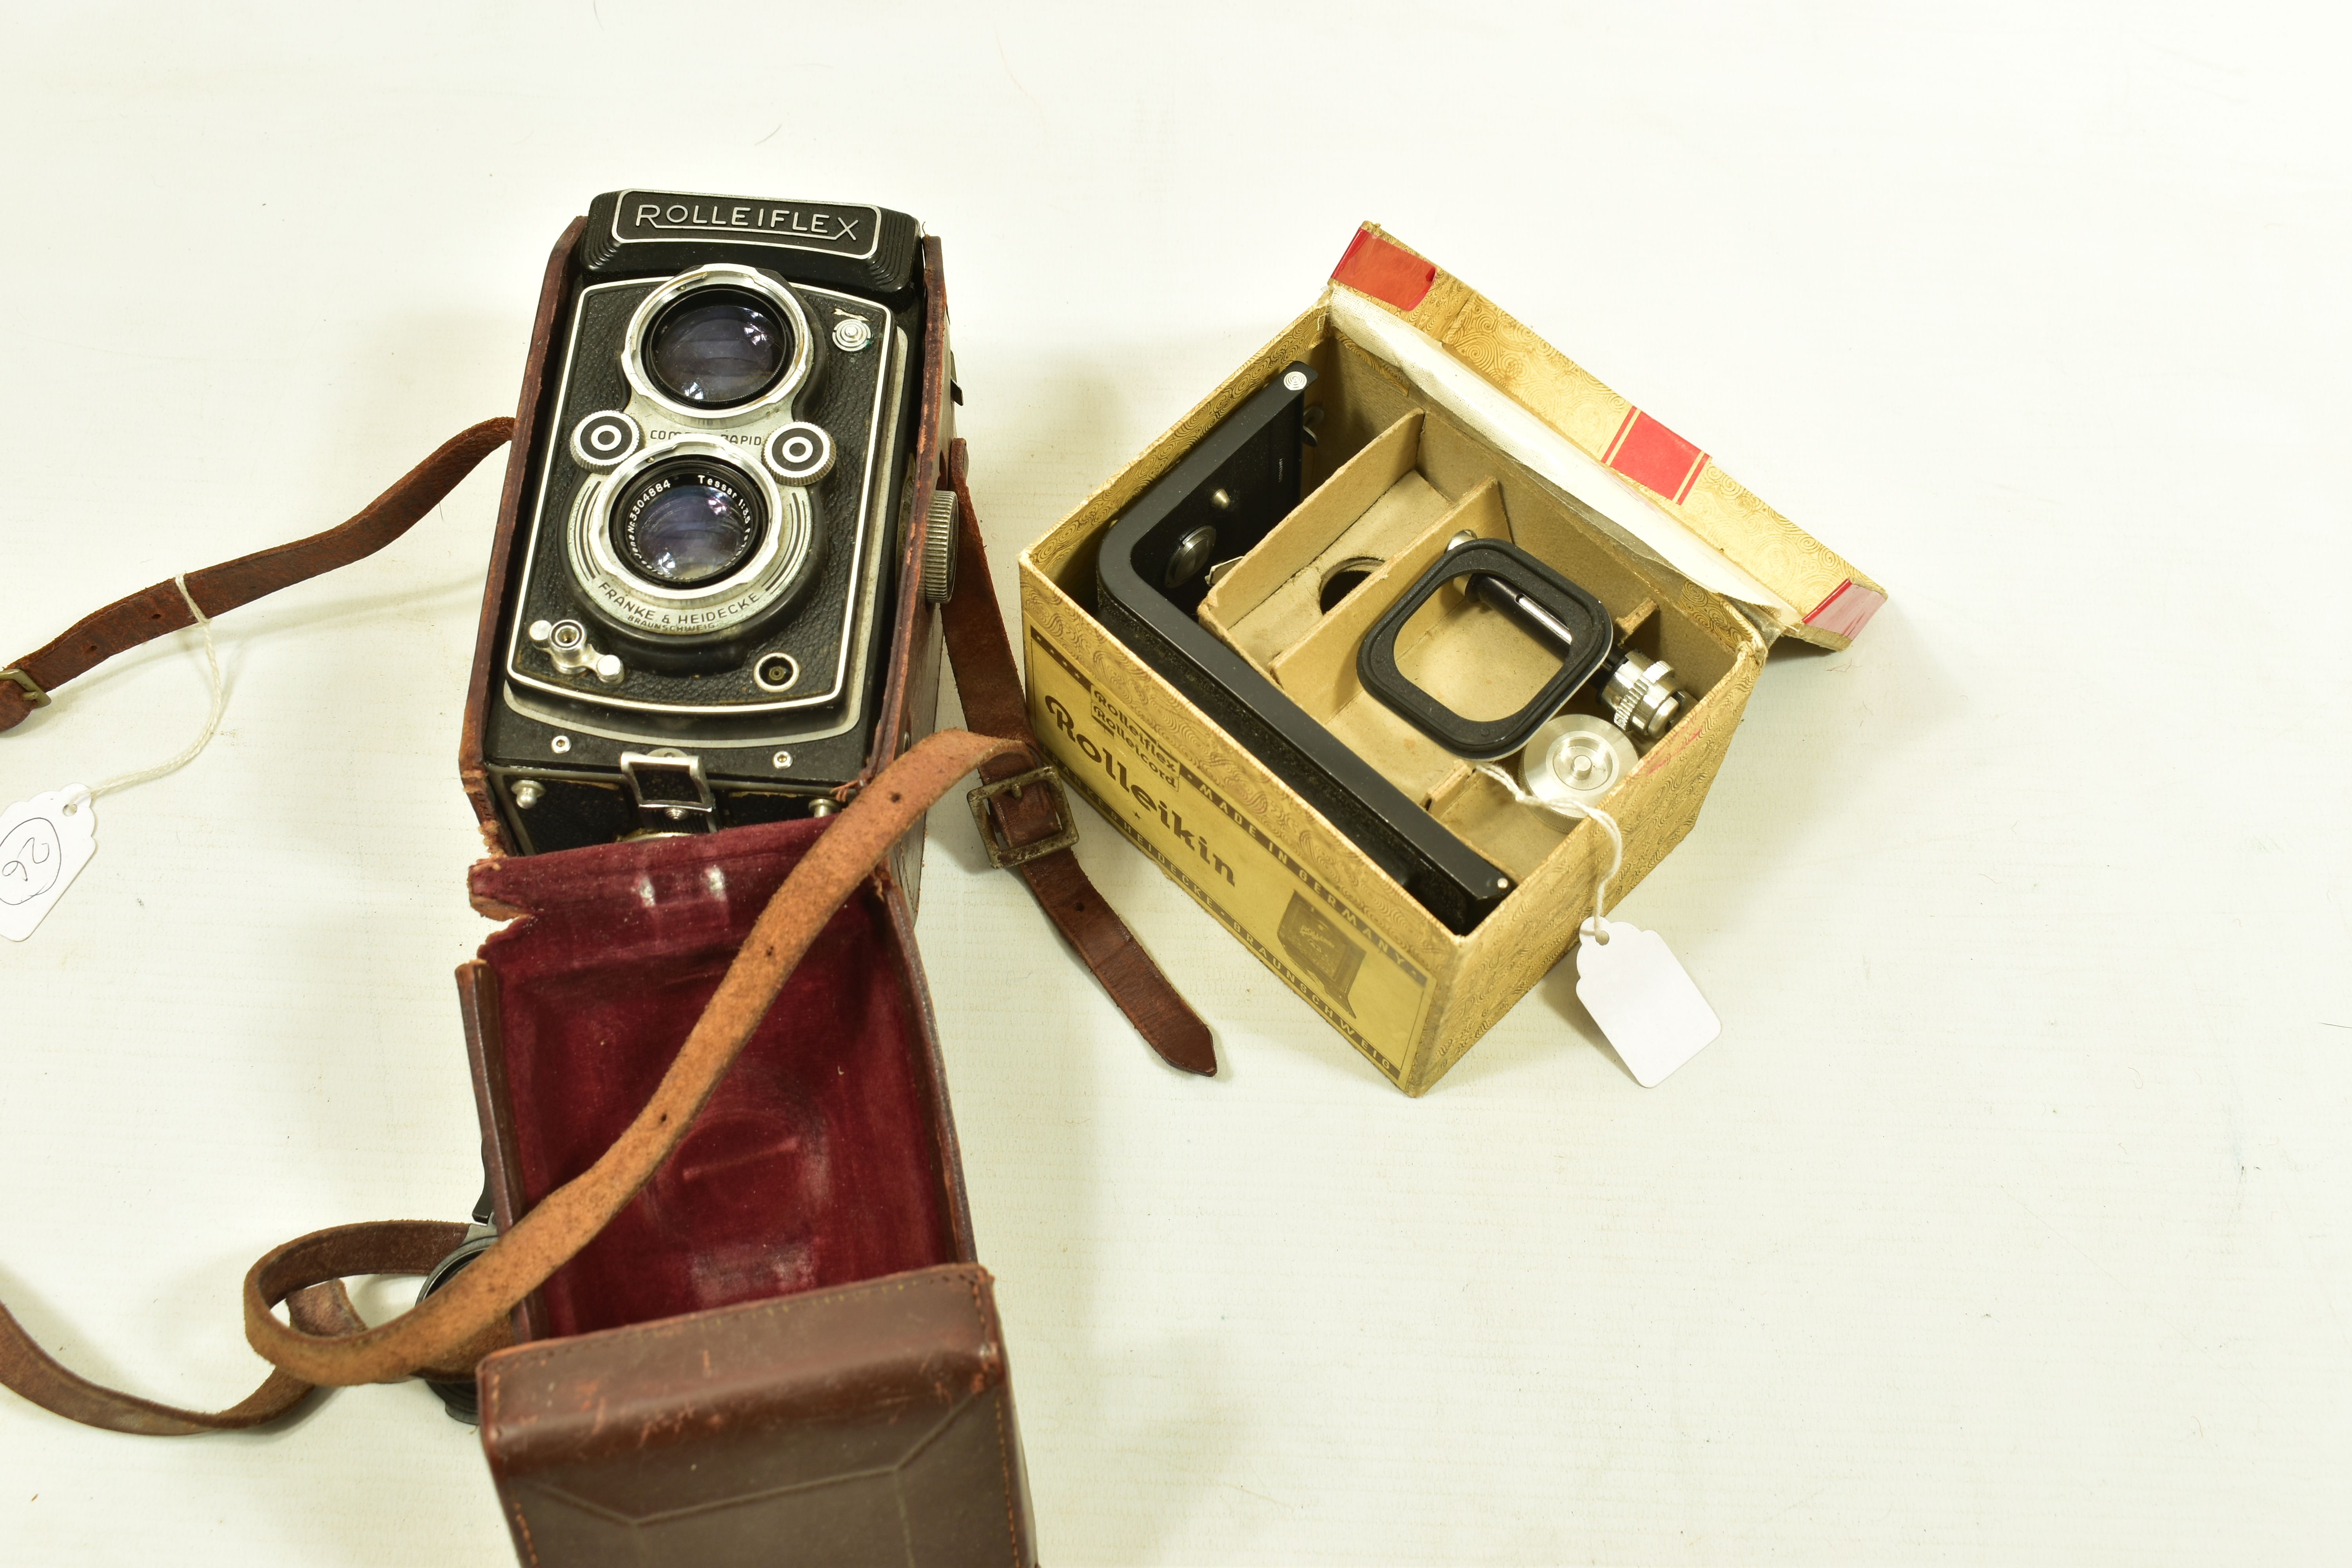 A ROLLEIFLEX AUTOMAT 6X6 K4 50 TLR CAMERA Serial No 1166151 fitted with Tessar 7.5cm f 3.5 with a